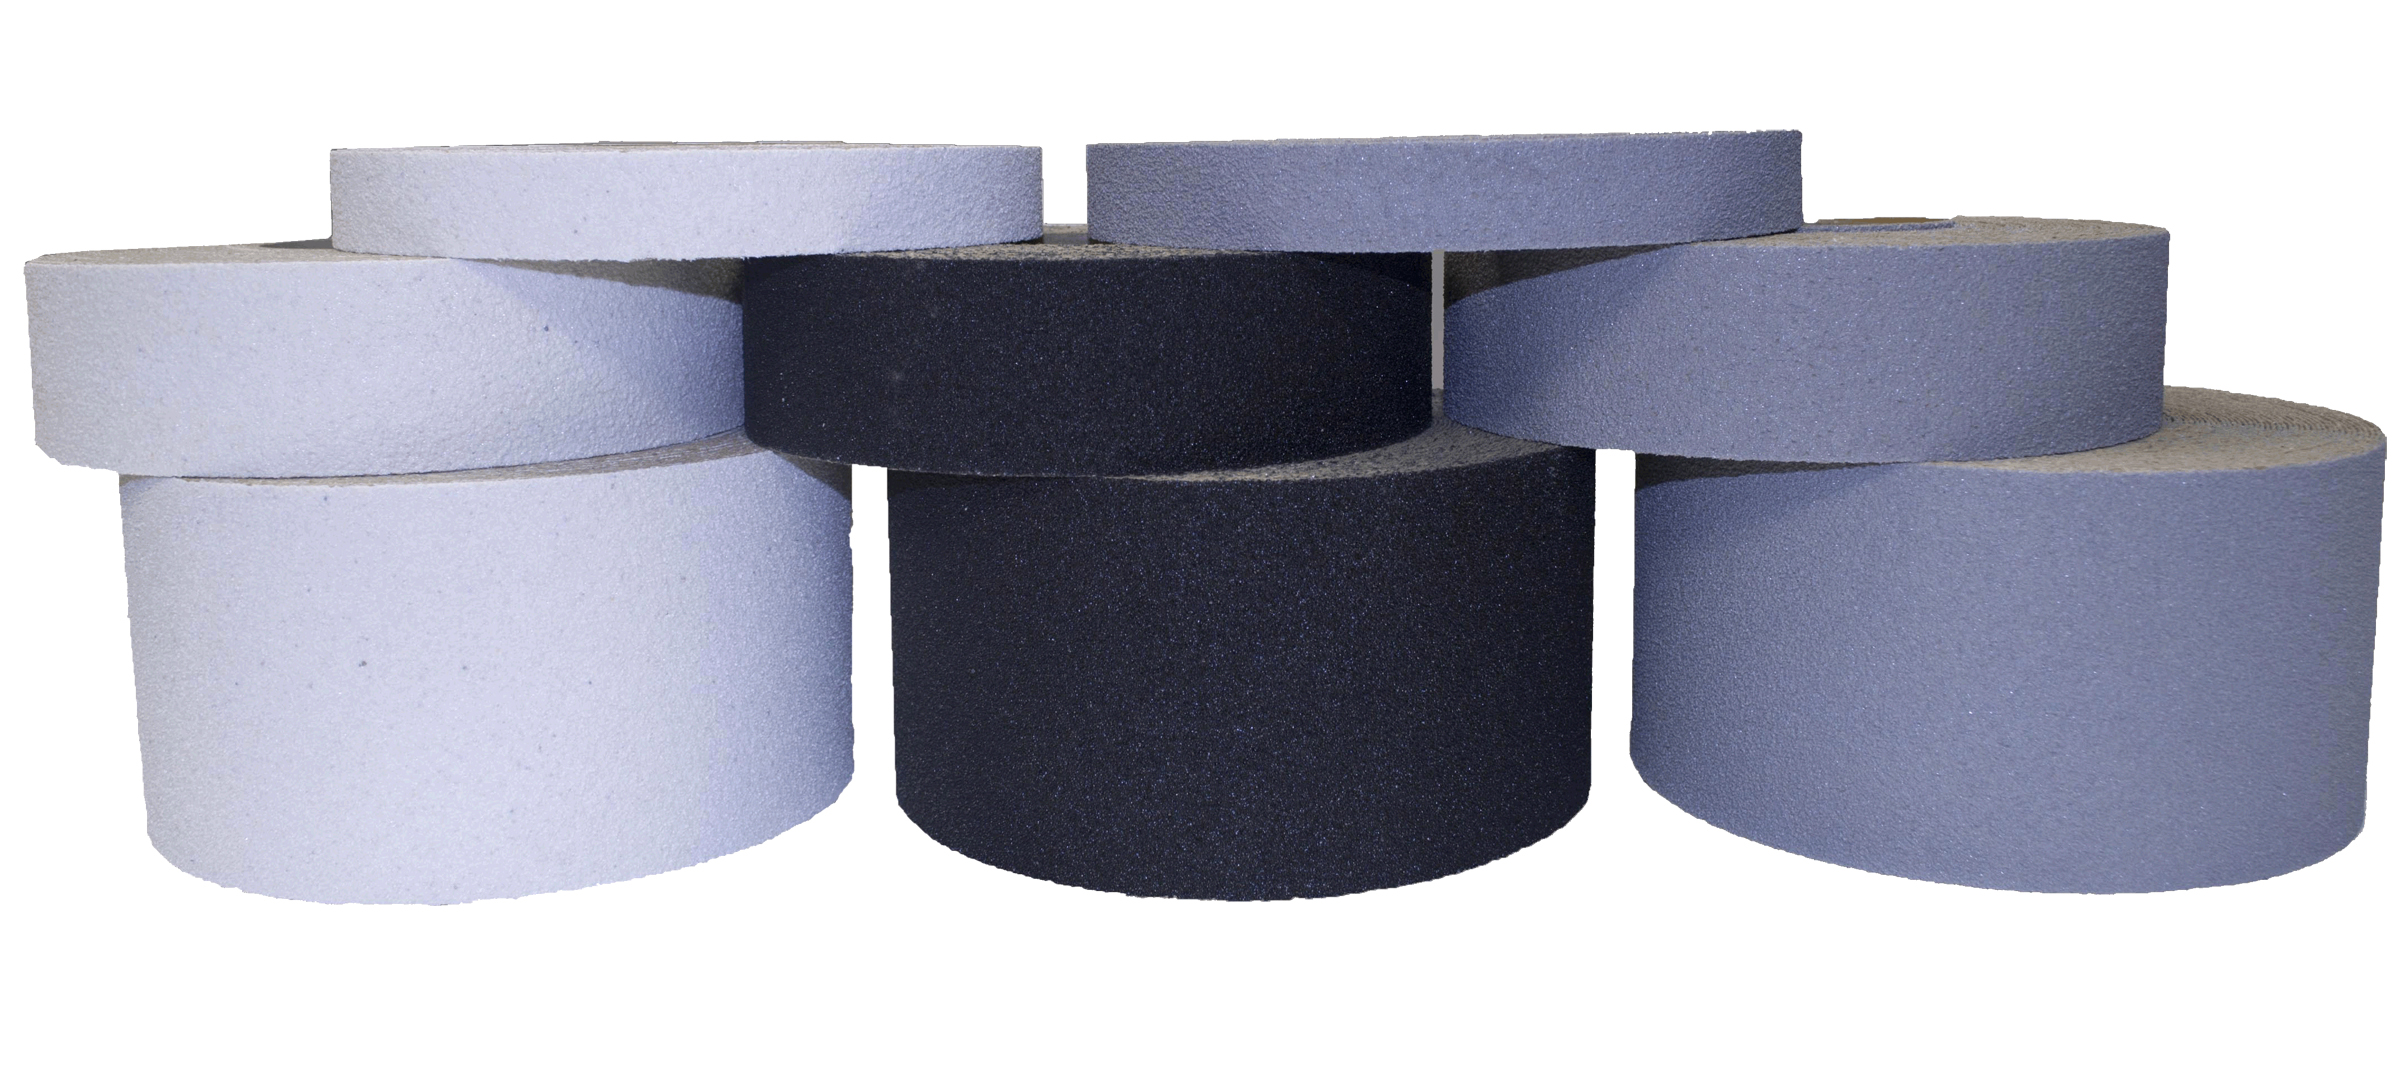 Mop Top anti slip tape features a mineral surface designed for both slip-resistance and faster cleaning